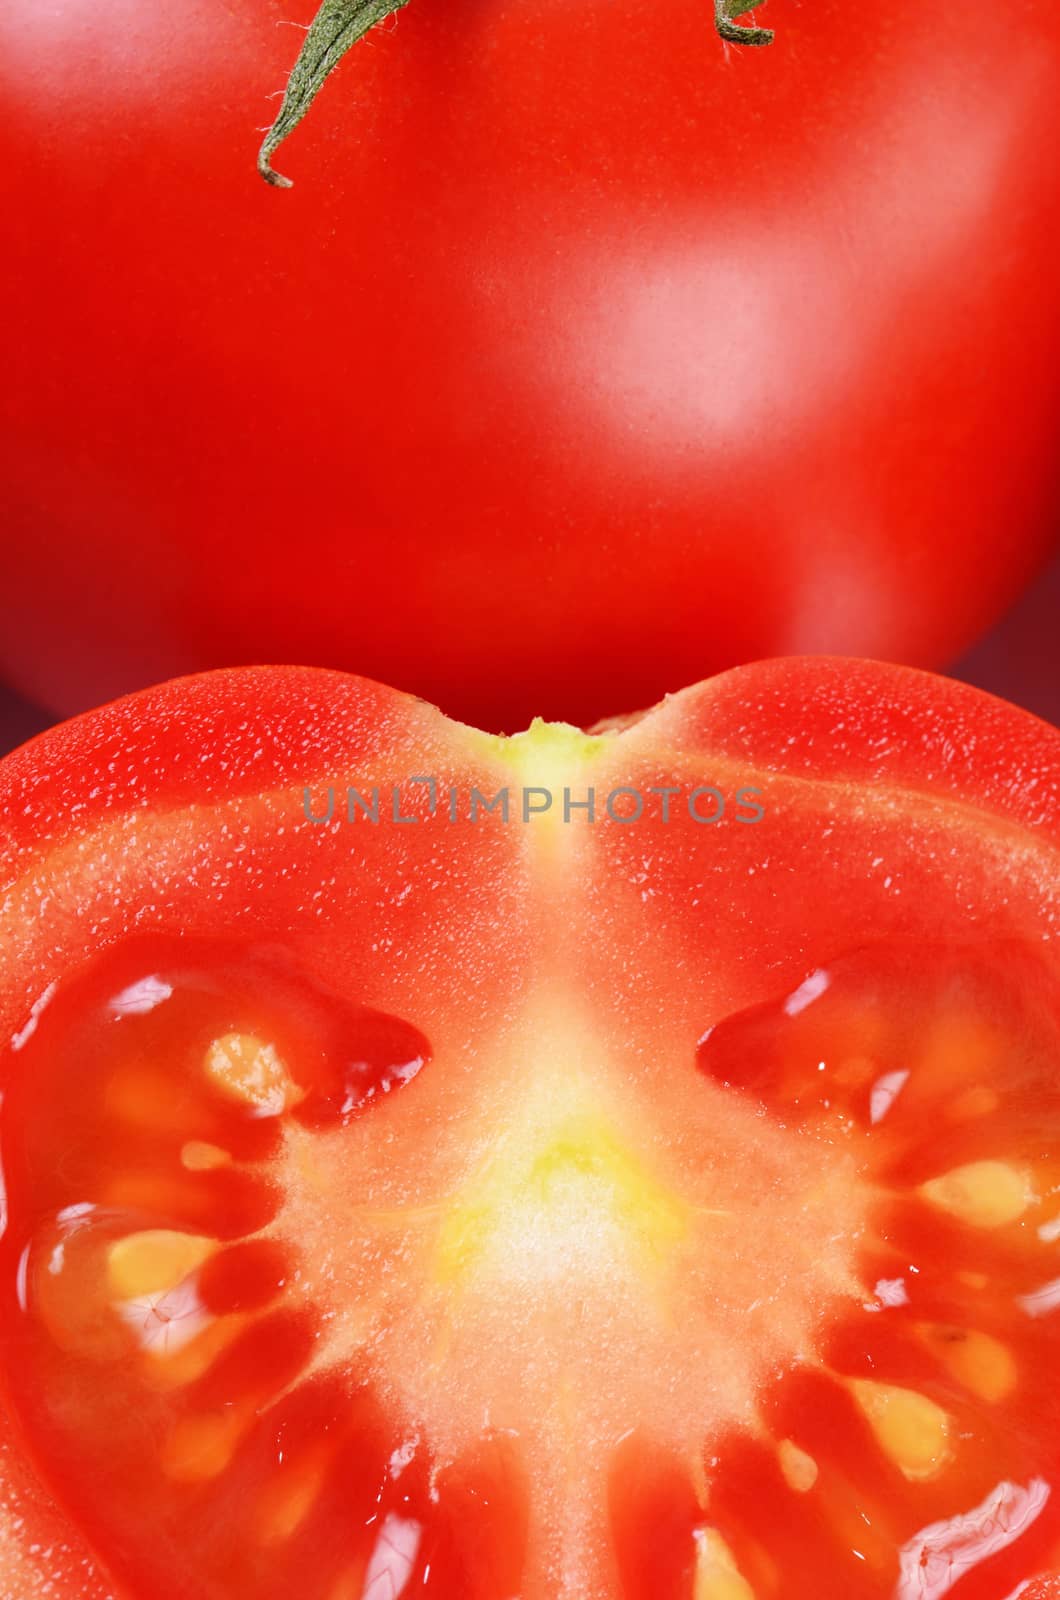 The red fresh tomatoes cut. Close up